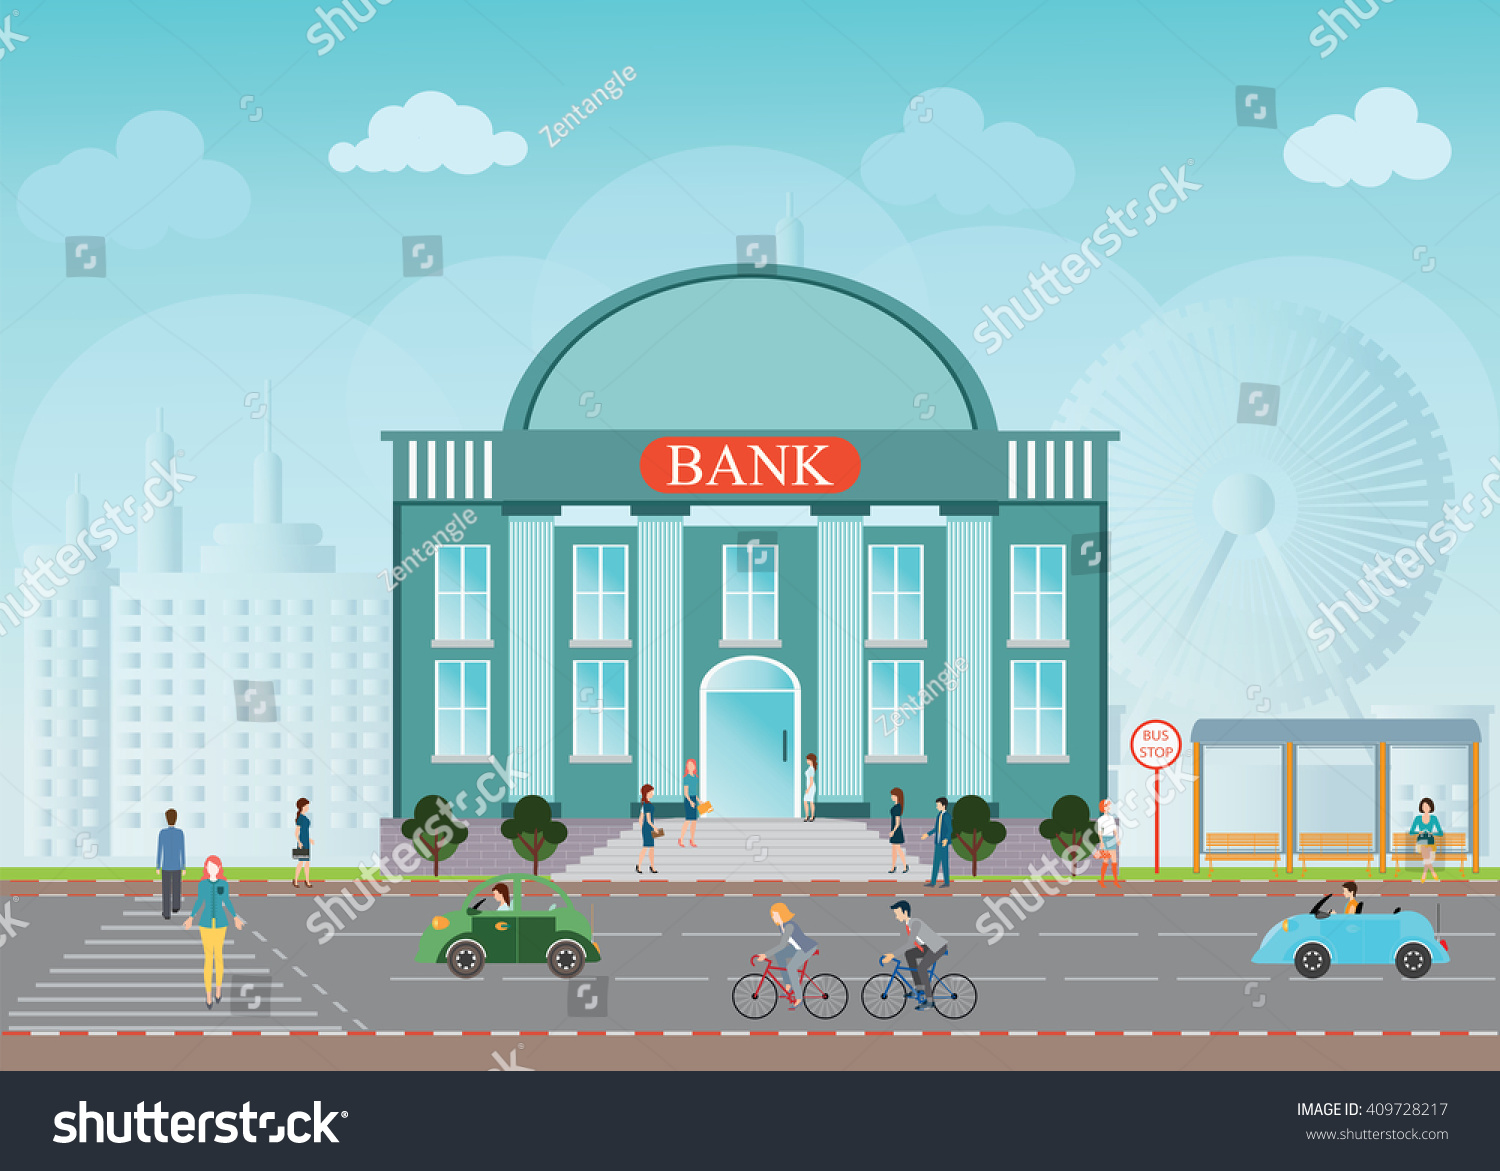 Bank Building Exterior City Space Skylines Stock Vector 